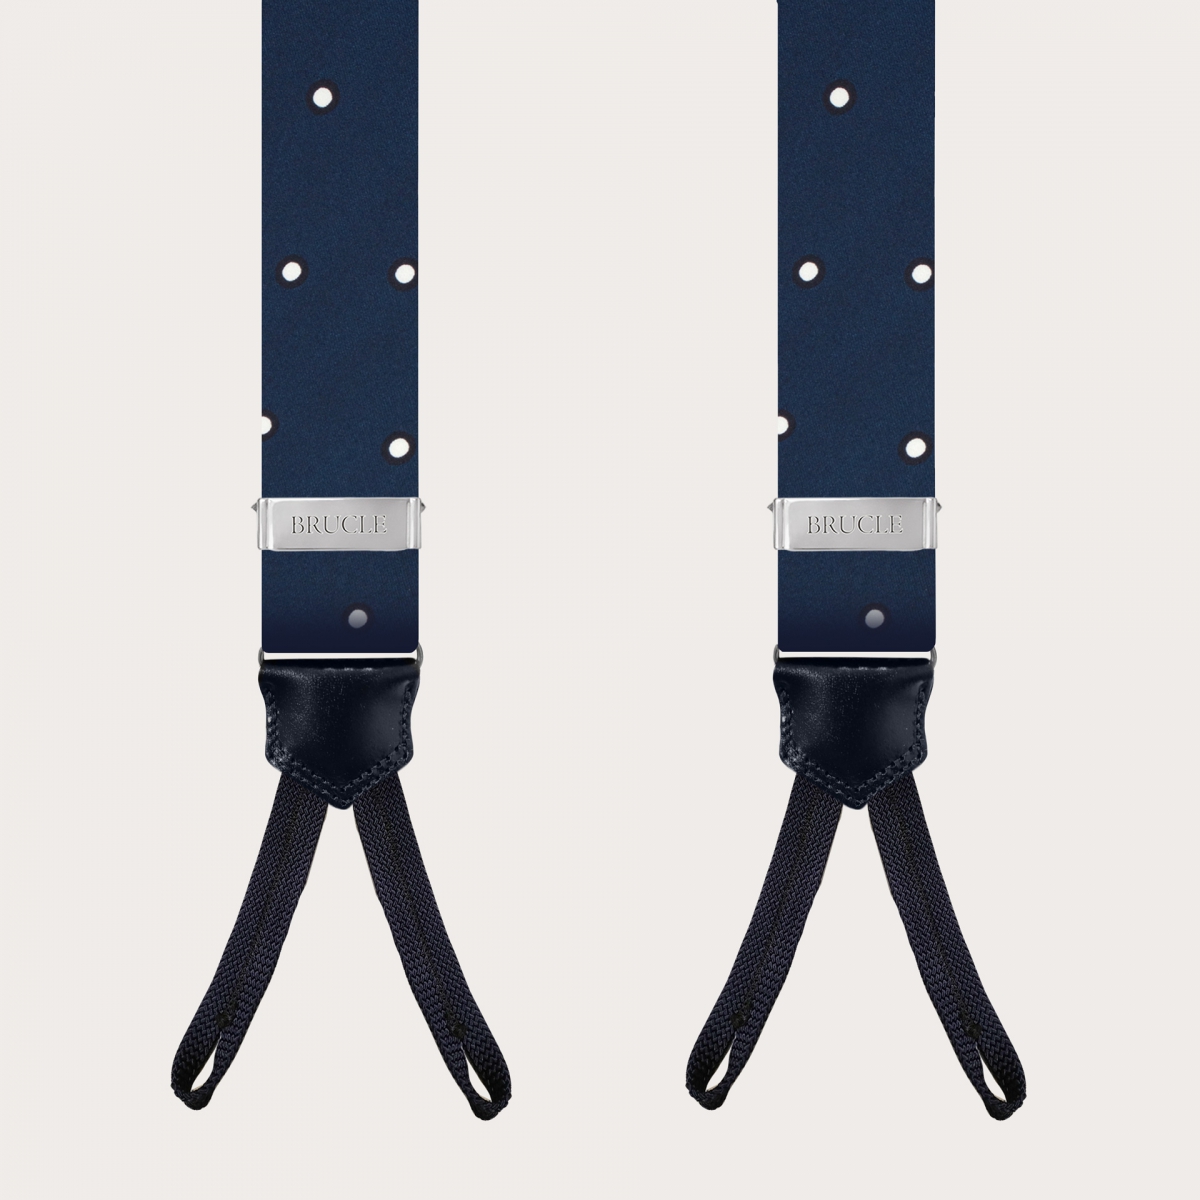 BRUCLE Elegant silk suspenders with buttonholes, blue with white polka dot pattern